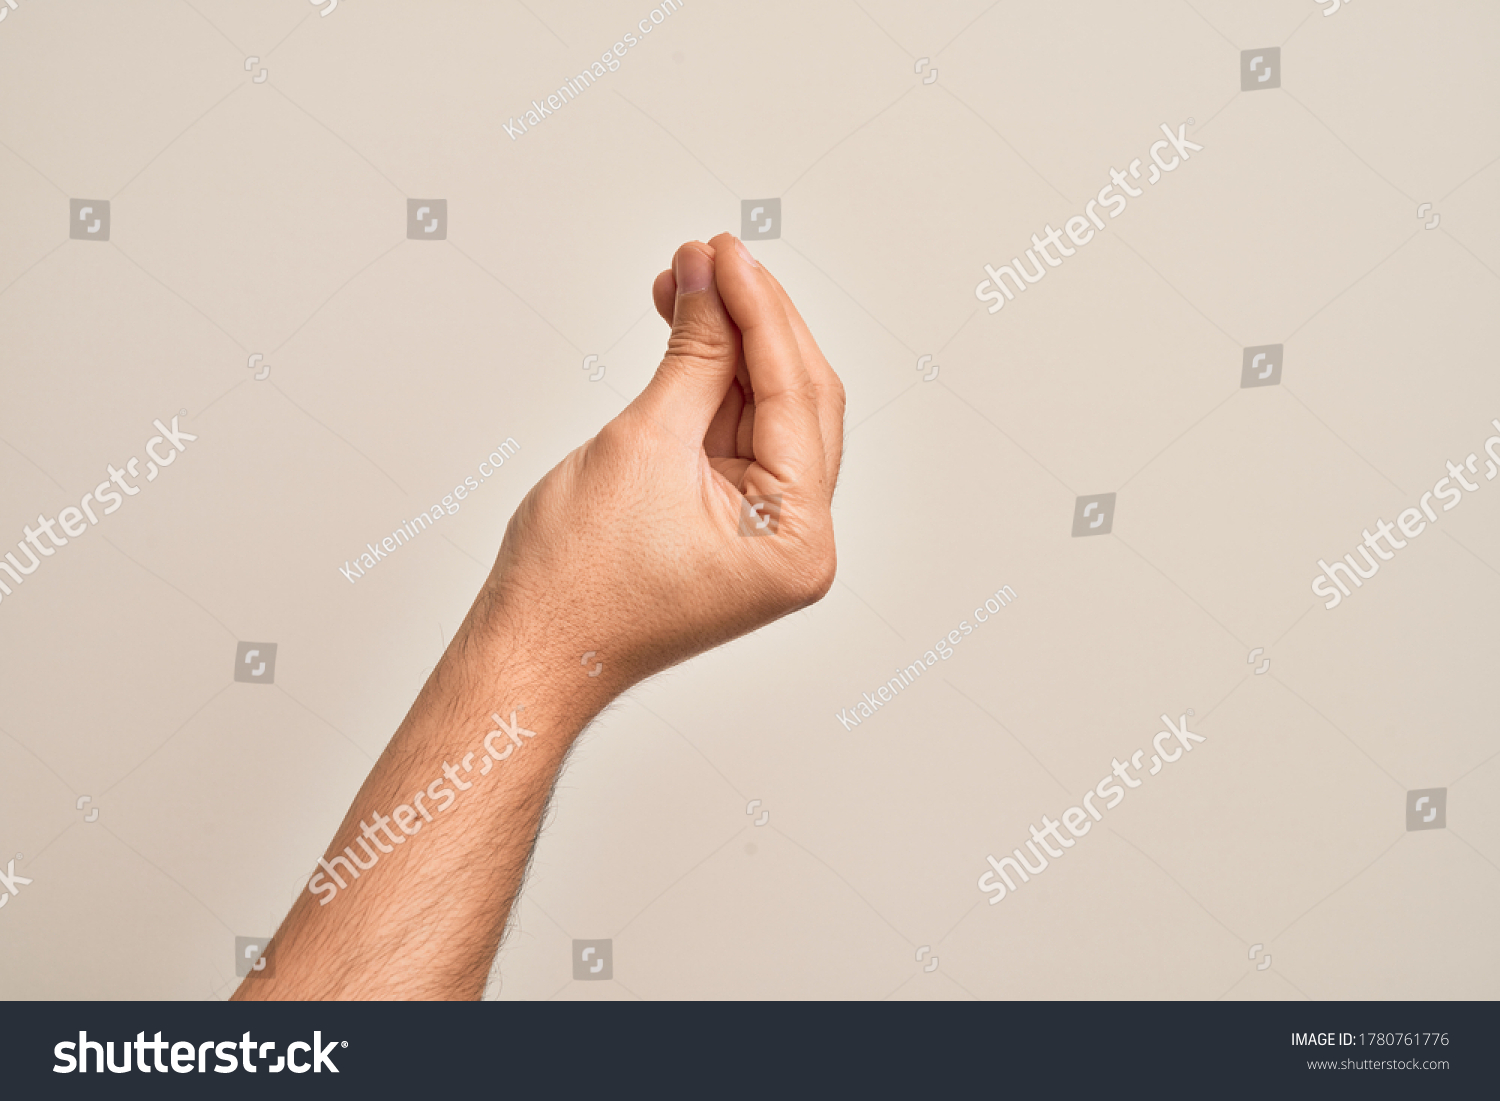 Hand of caucasian young man showing fingers over isolated white background doing Italian gesture with fingers together, communication gesture movement #1780761776